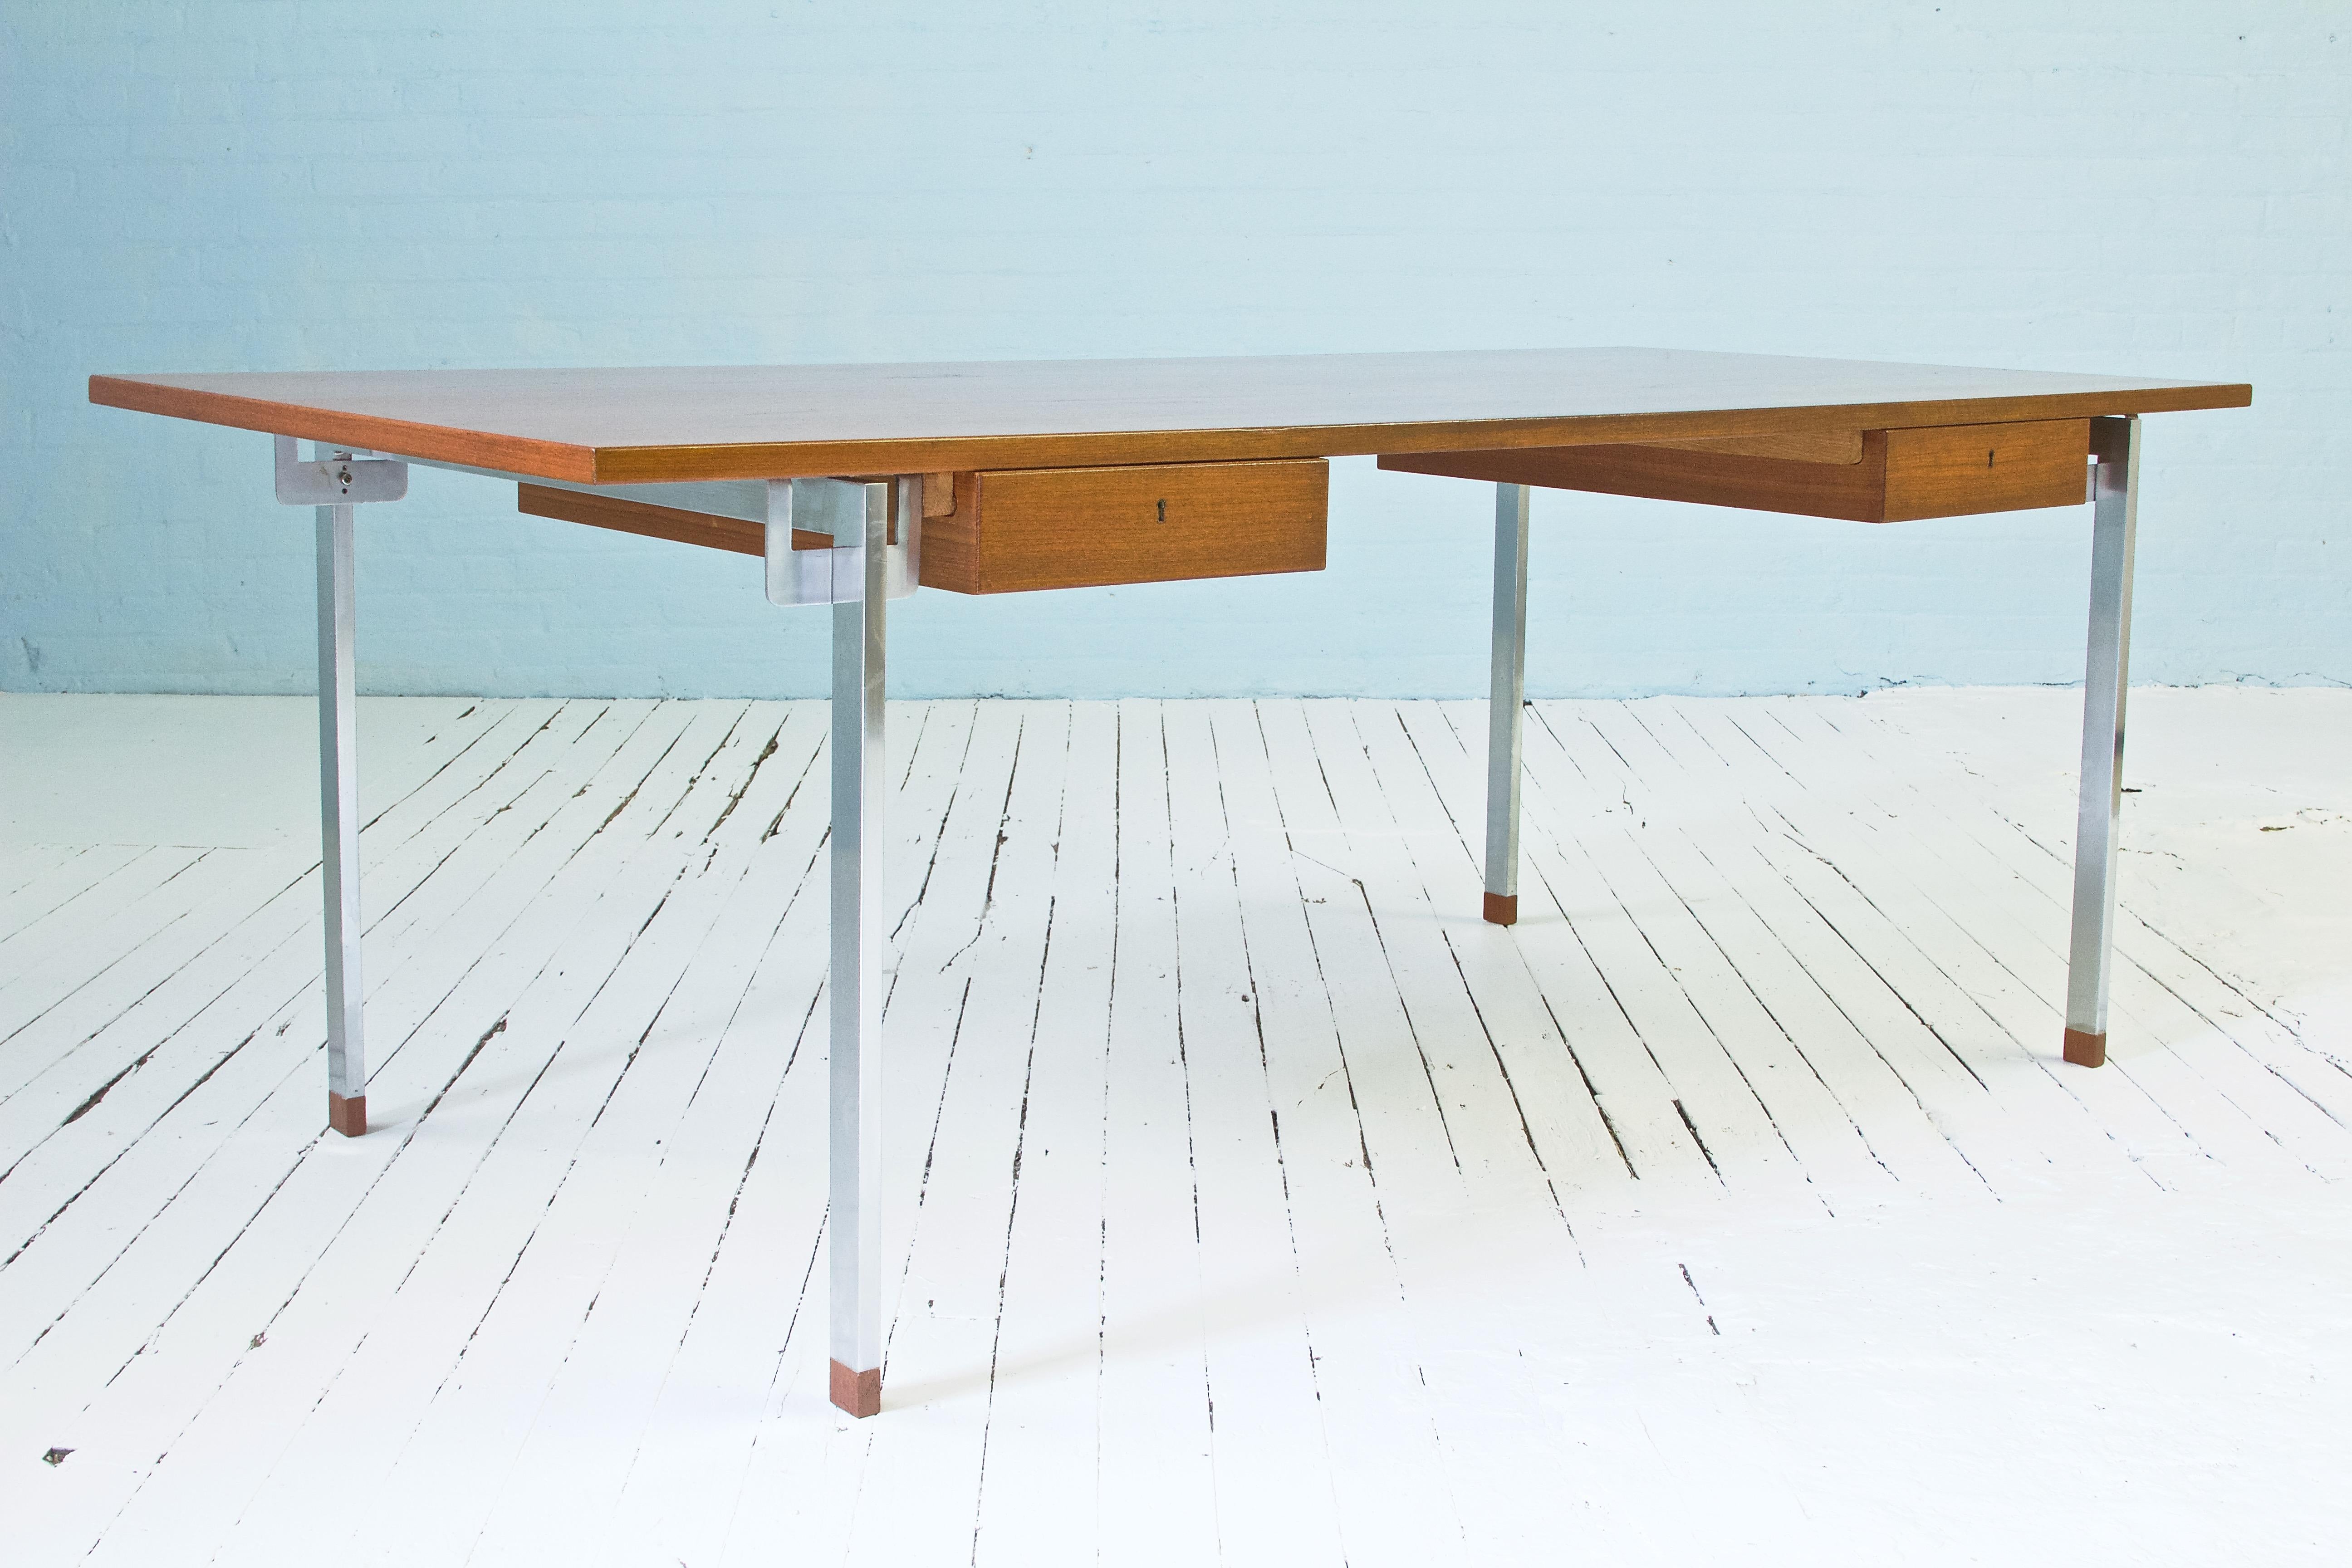 Hans J. Wegner's partnership with Andreas Tuck produced some of his most innovative designs in desks and tables. This rare desk, designed in the 1960s, foreshadows Wegner's departure from strictly wood-based designs; demonstrating his flowering